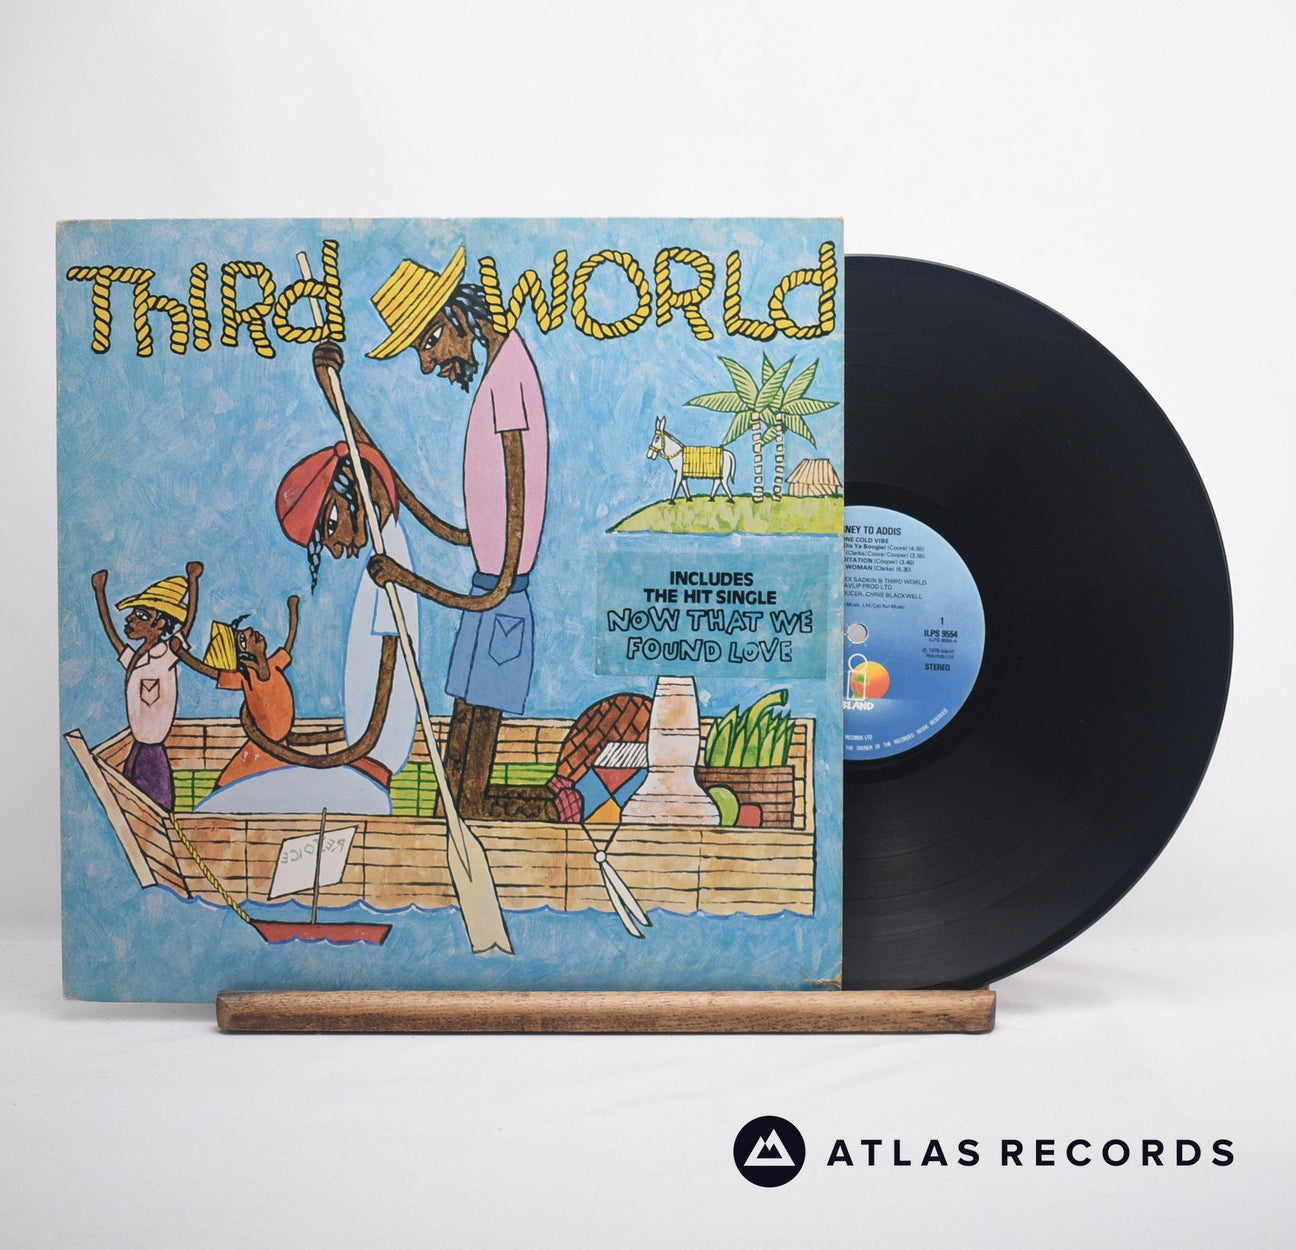 Third World Journey To Addis LP Vinyl Record - Front Cover & Record